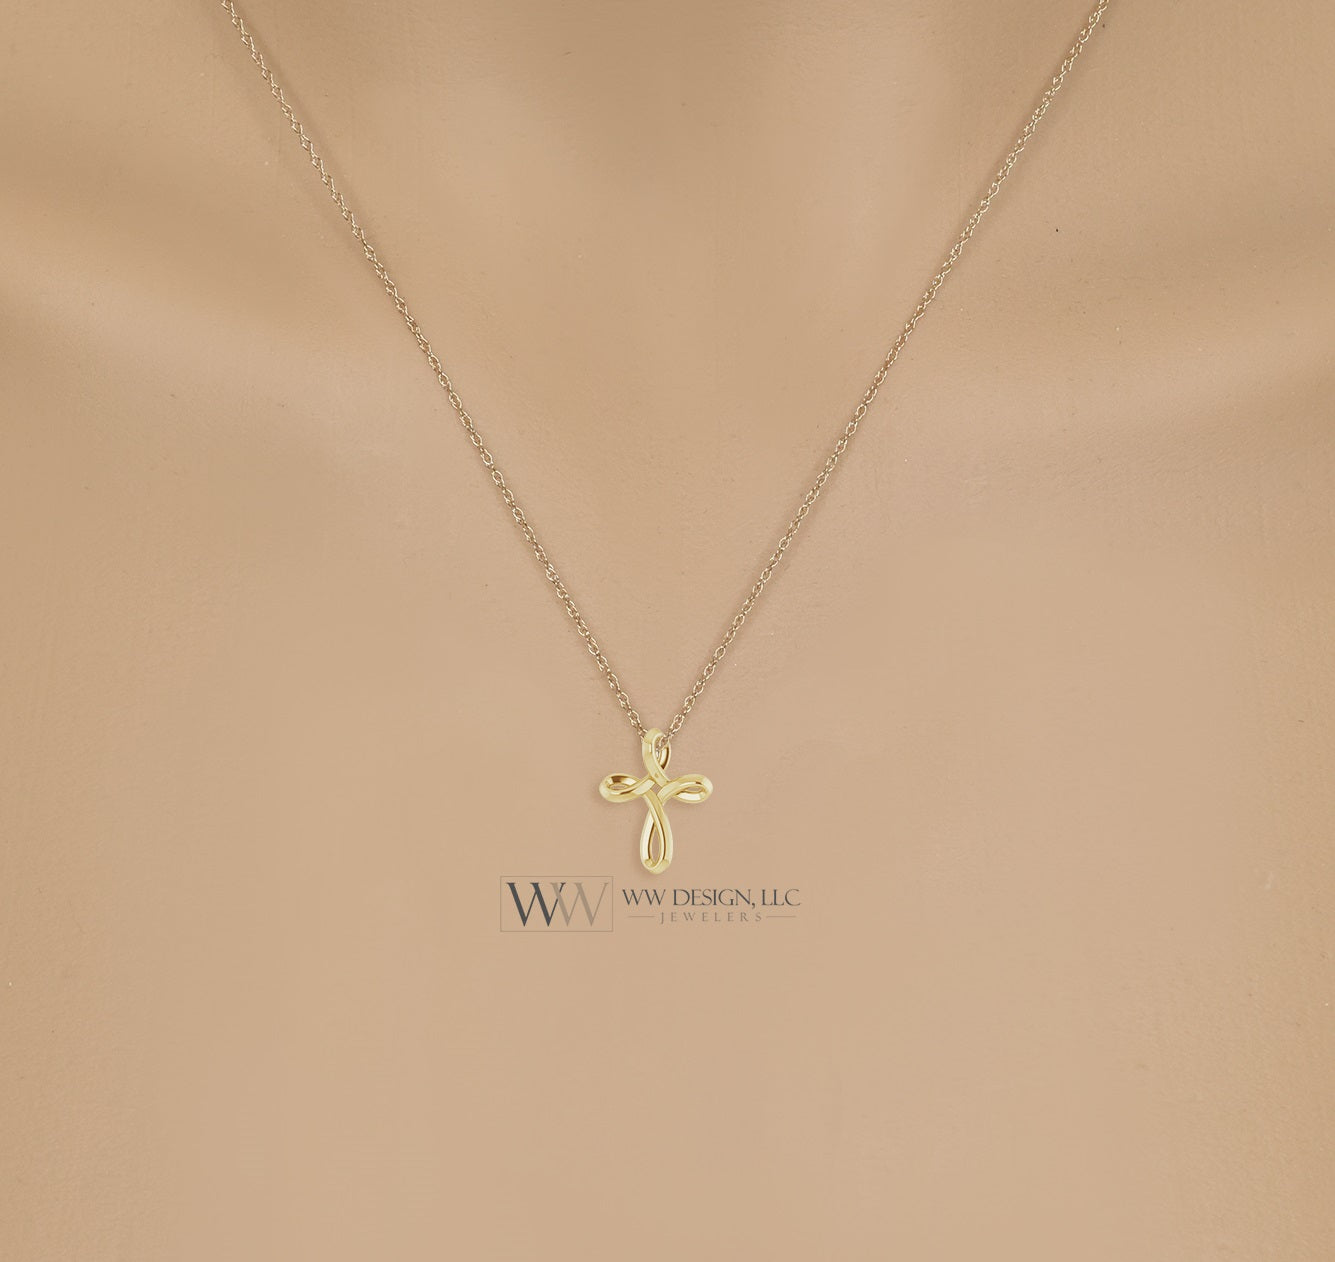 Minimalist CROSS Necklace - 14k SOLID Gold (Yellow, White, Rose), Platinum or Sterling Silver 13mmx10.5mm     WWDesignJewelers.com